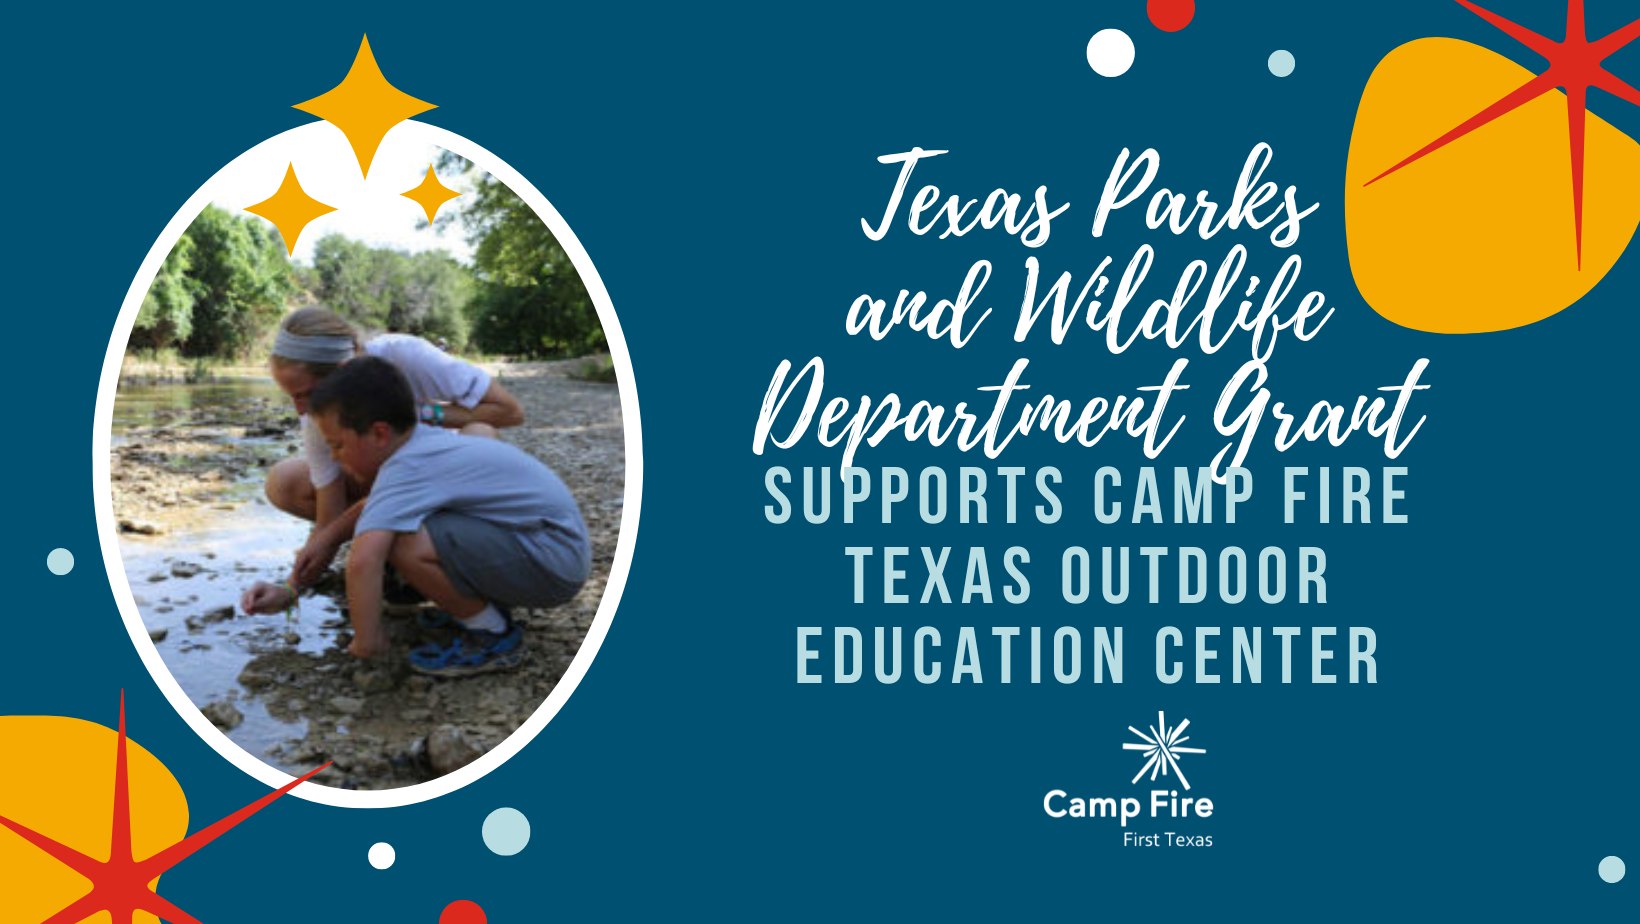 Texas Parks and Wildlife Department Grant Supports Camp Fire Texas Outdoor Education Center, a Camp Fire First Texas blog